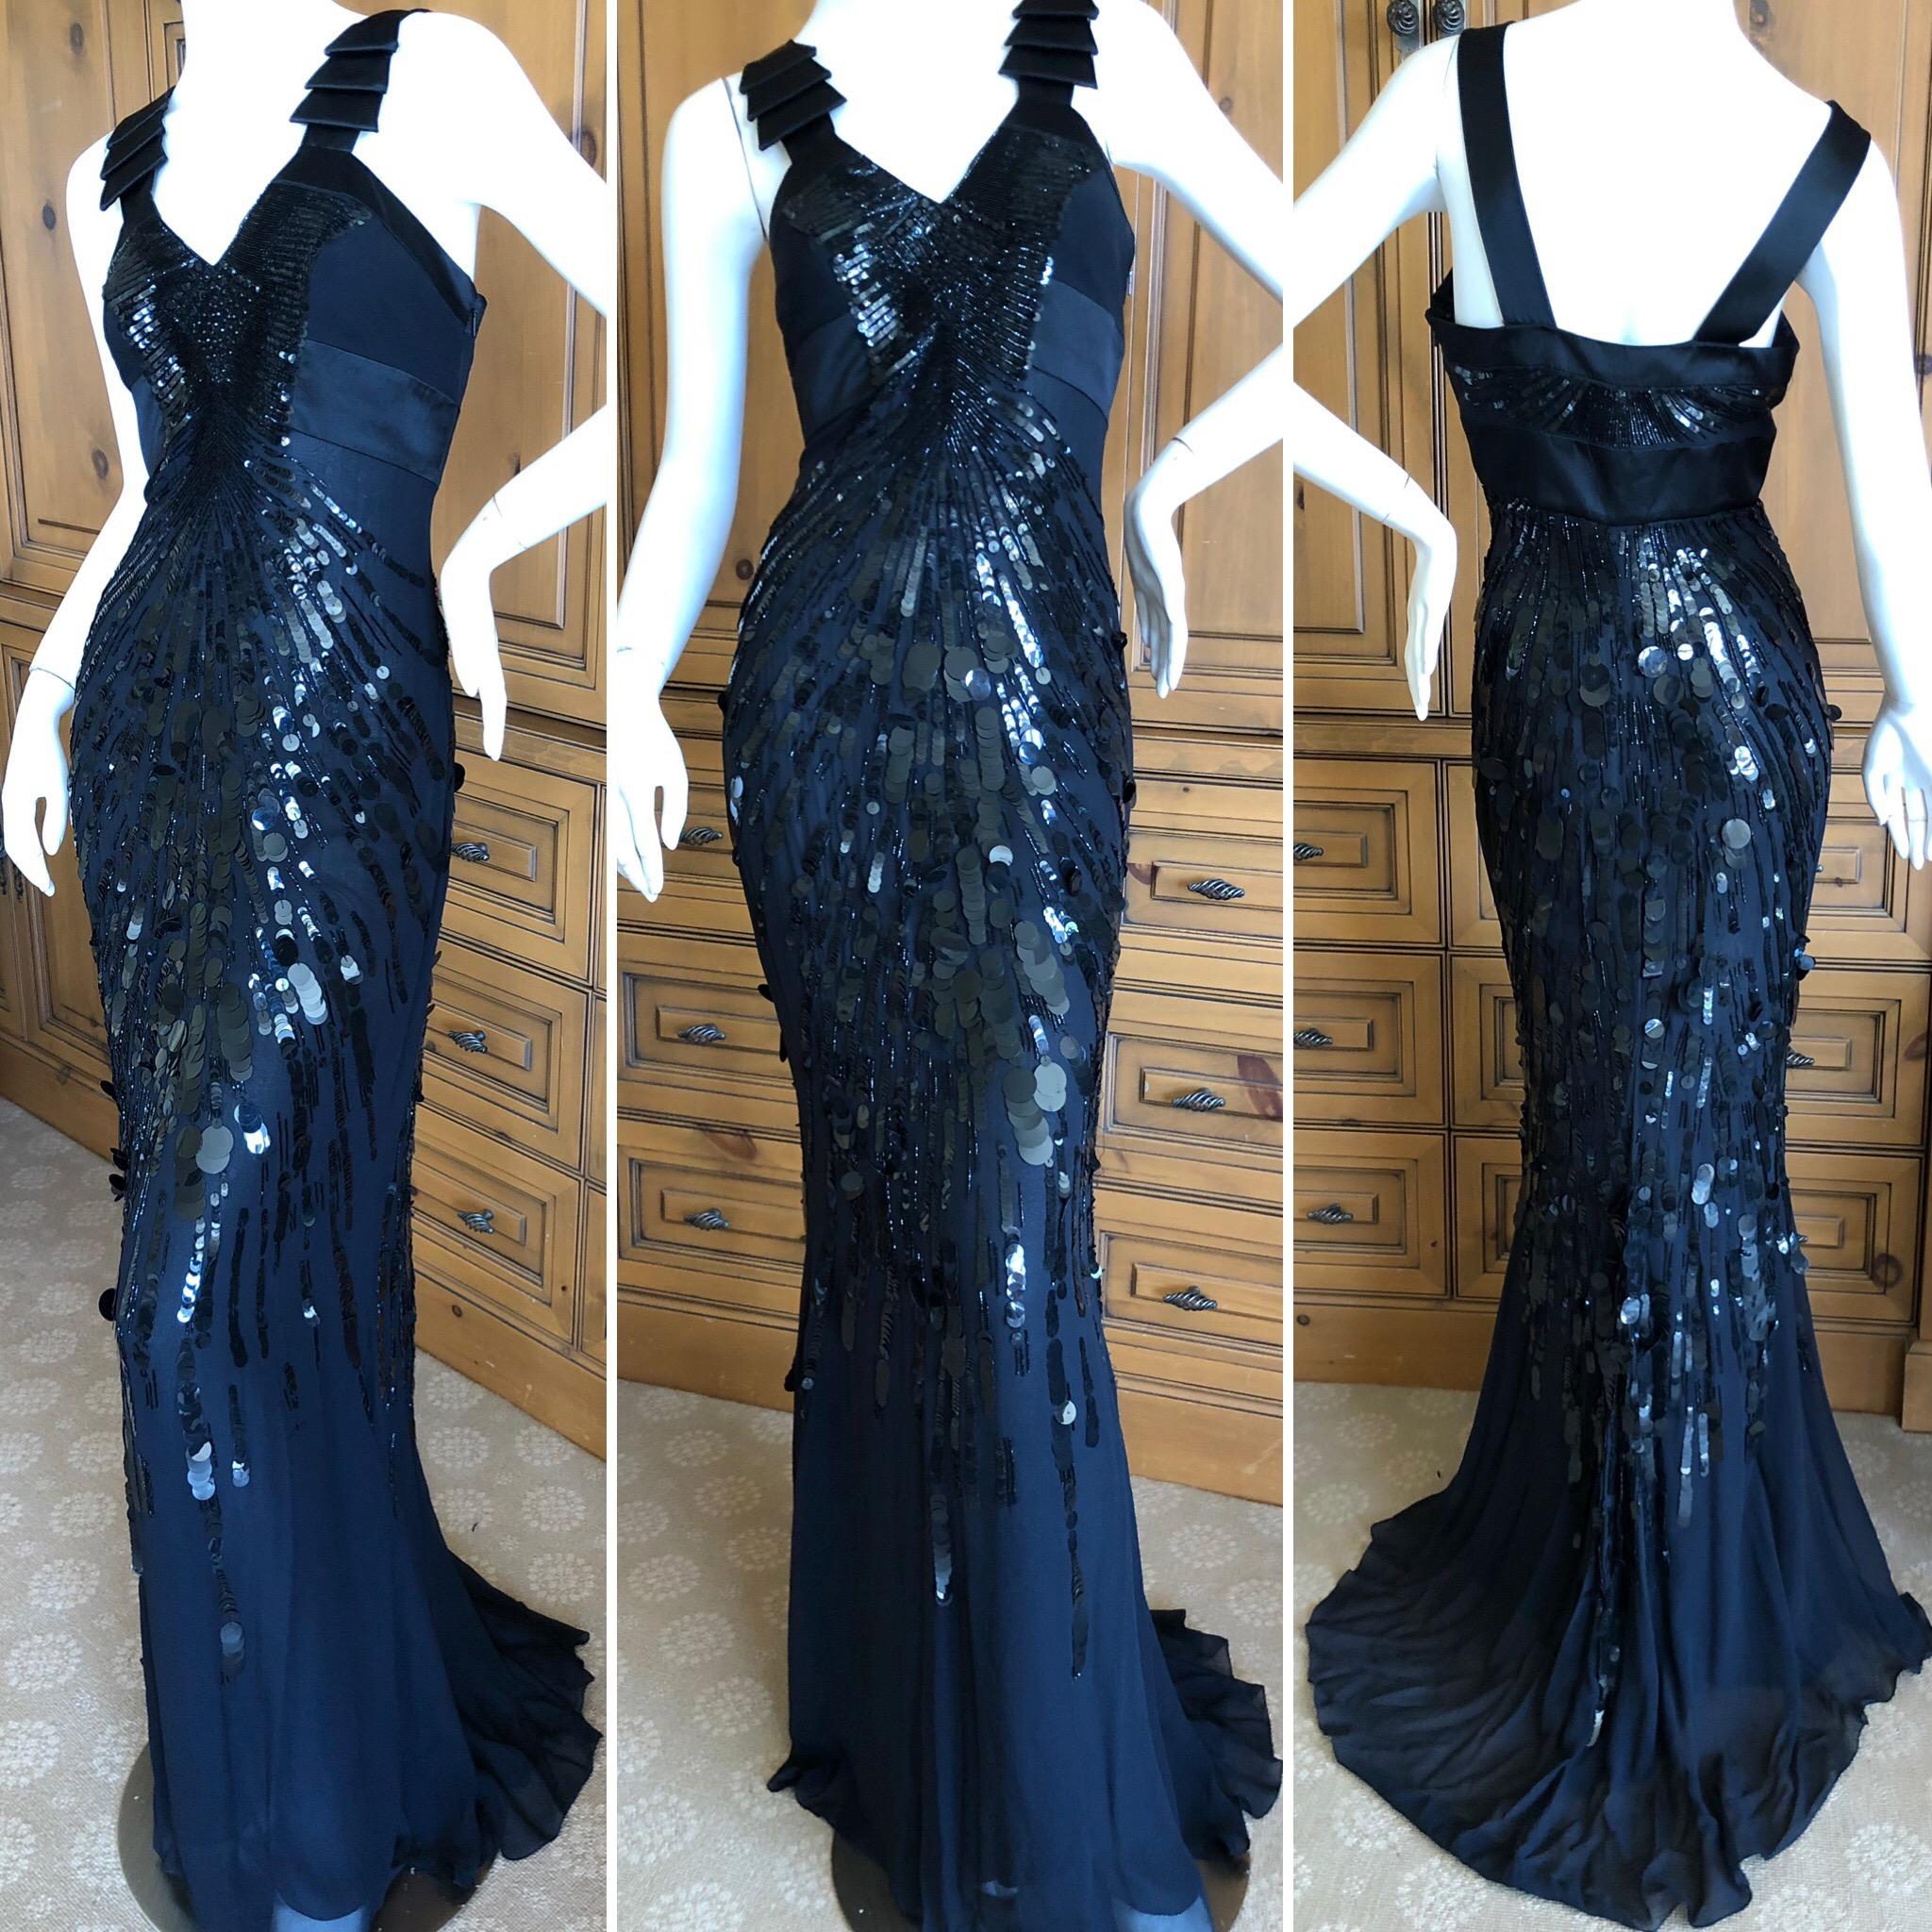  Versace Sequin and Bead Embellished Vintage Black Evening Dress.
This is so pretty , bt hard to capture in a photo
Marked size 44, it is appx size 6 today
Bust 36